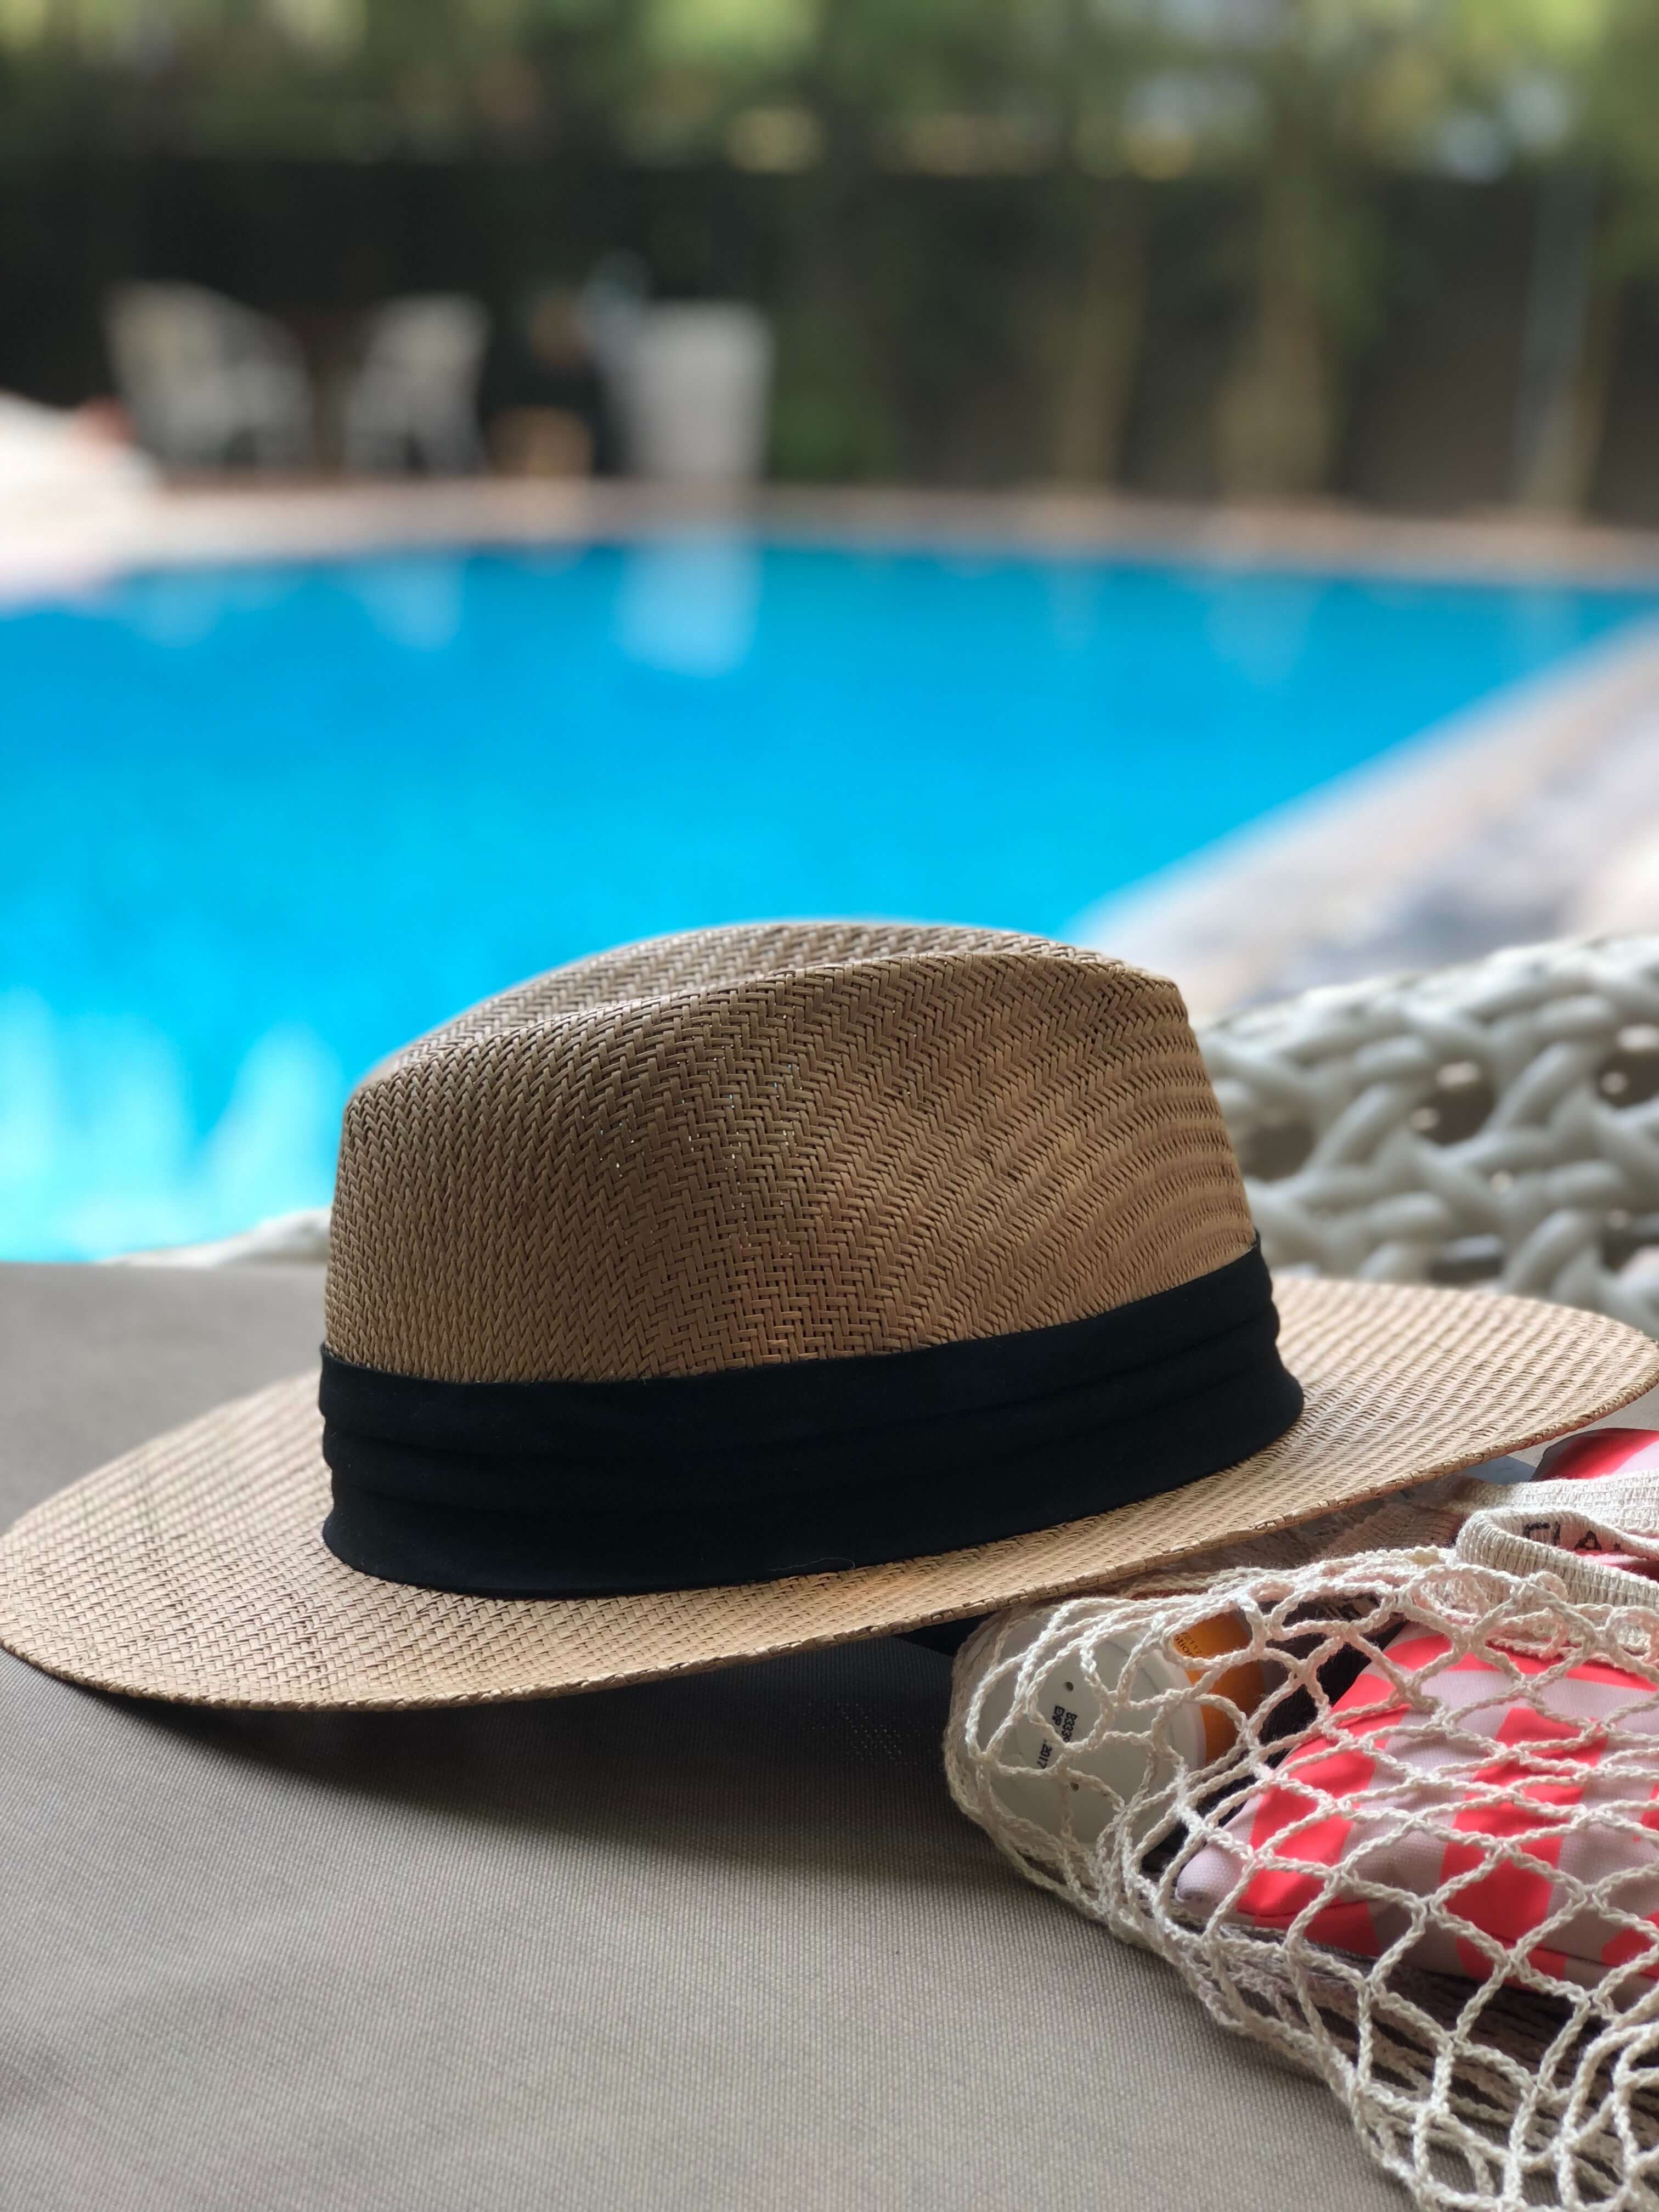 Hat laying poolside. Photo by Jude Stevens from Pexels